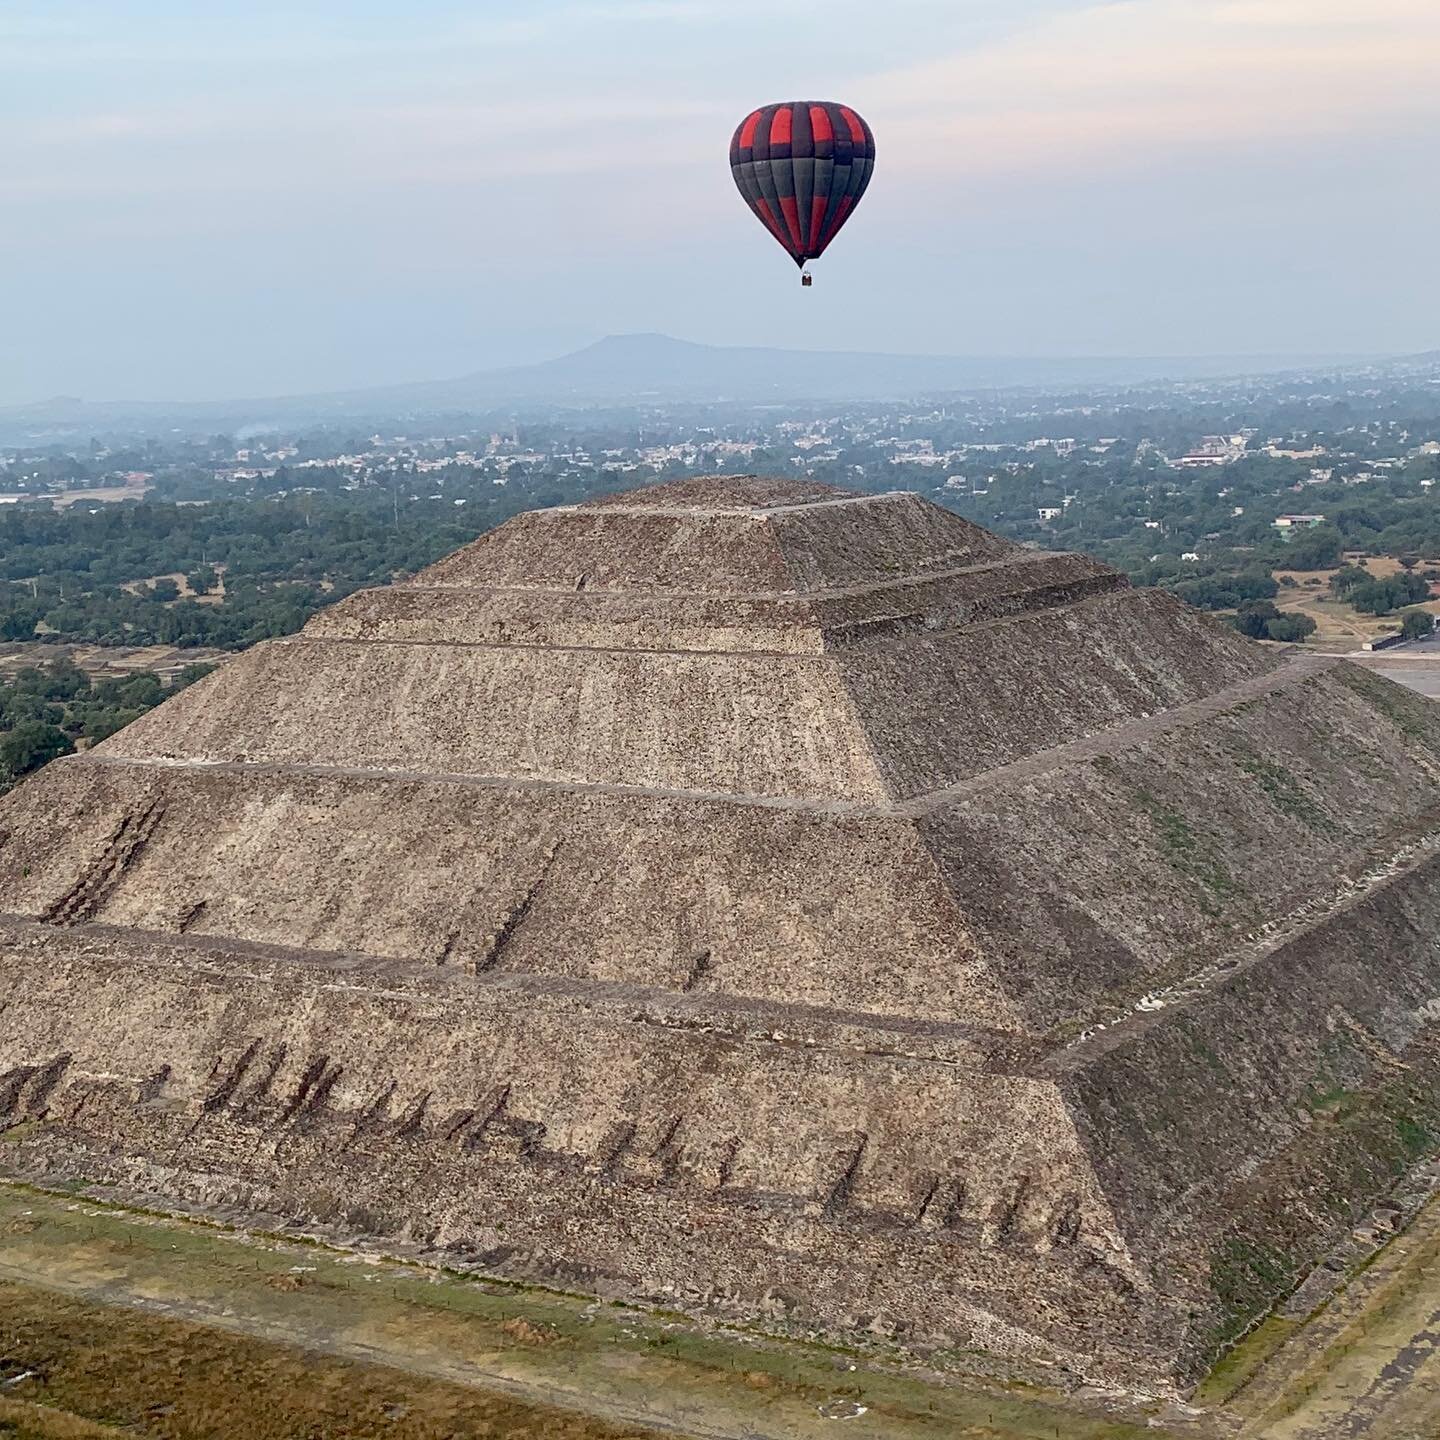 What a spectacular way to admire the Pyramid of the Sun, in Teotihuac&aacute;n, Mexico. #hotairballoon #teotihuacan #pyramid #pyramids #upupandaway #mexico #mexicocity #cdmx #travel #wander #wanderlust #wandersnevercease